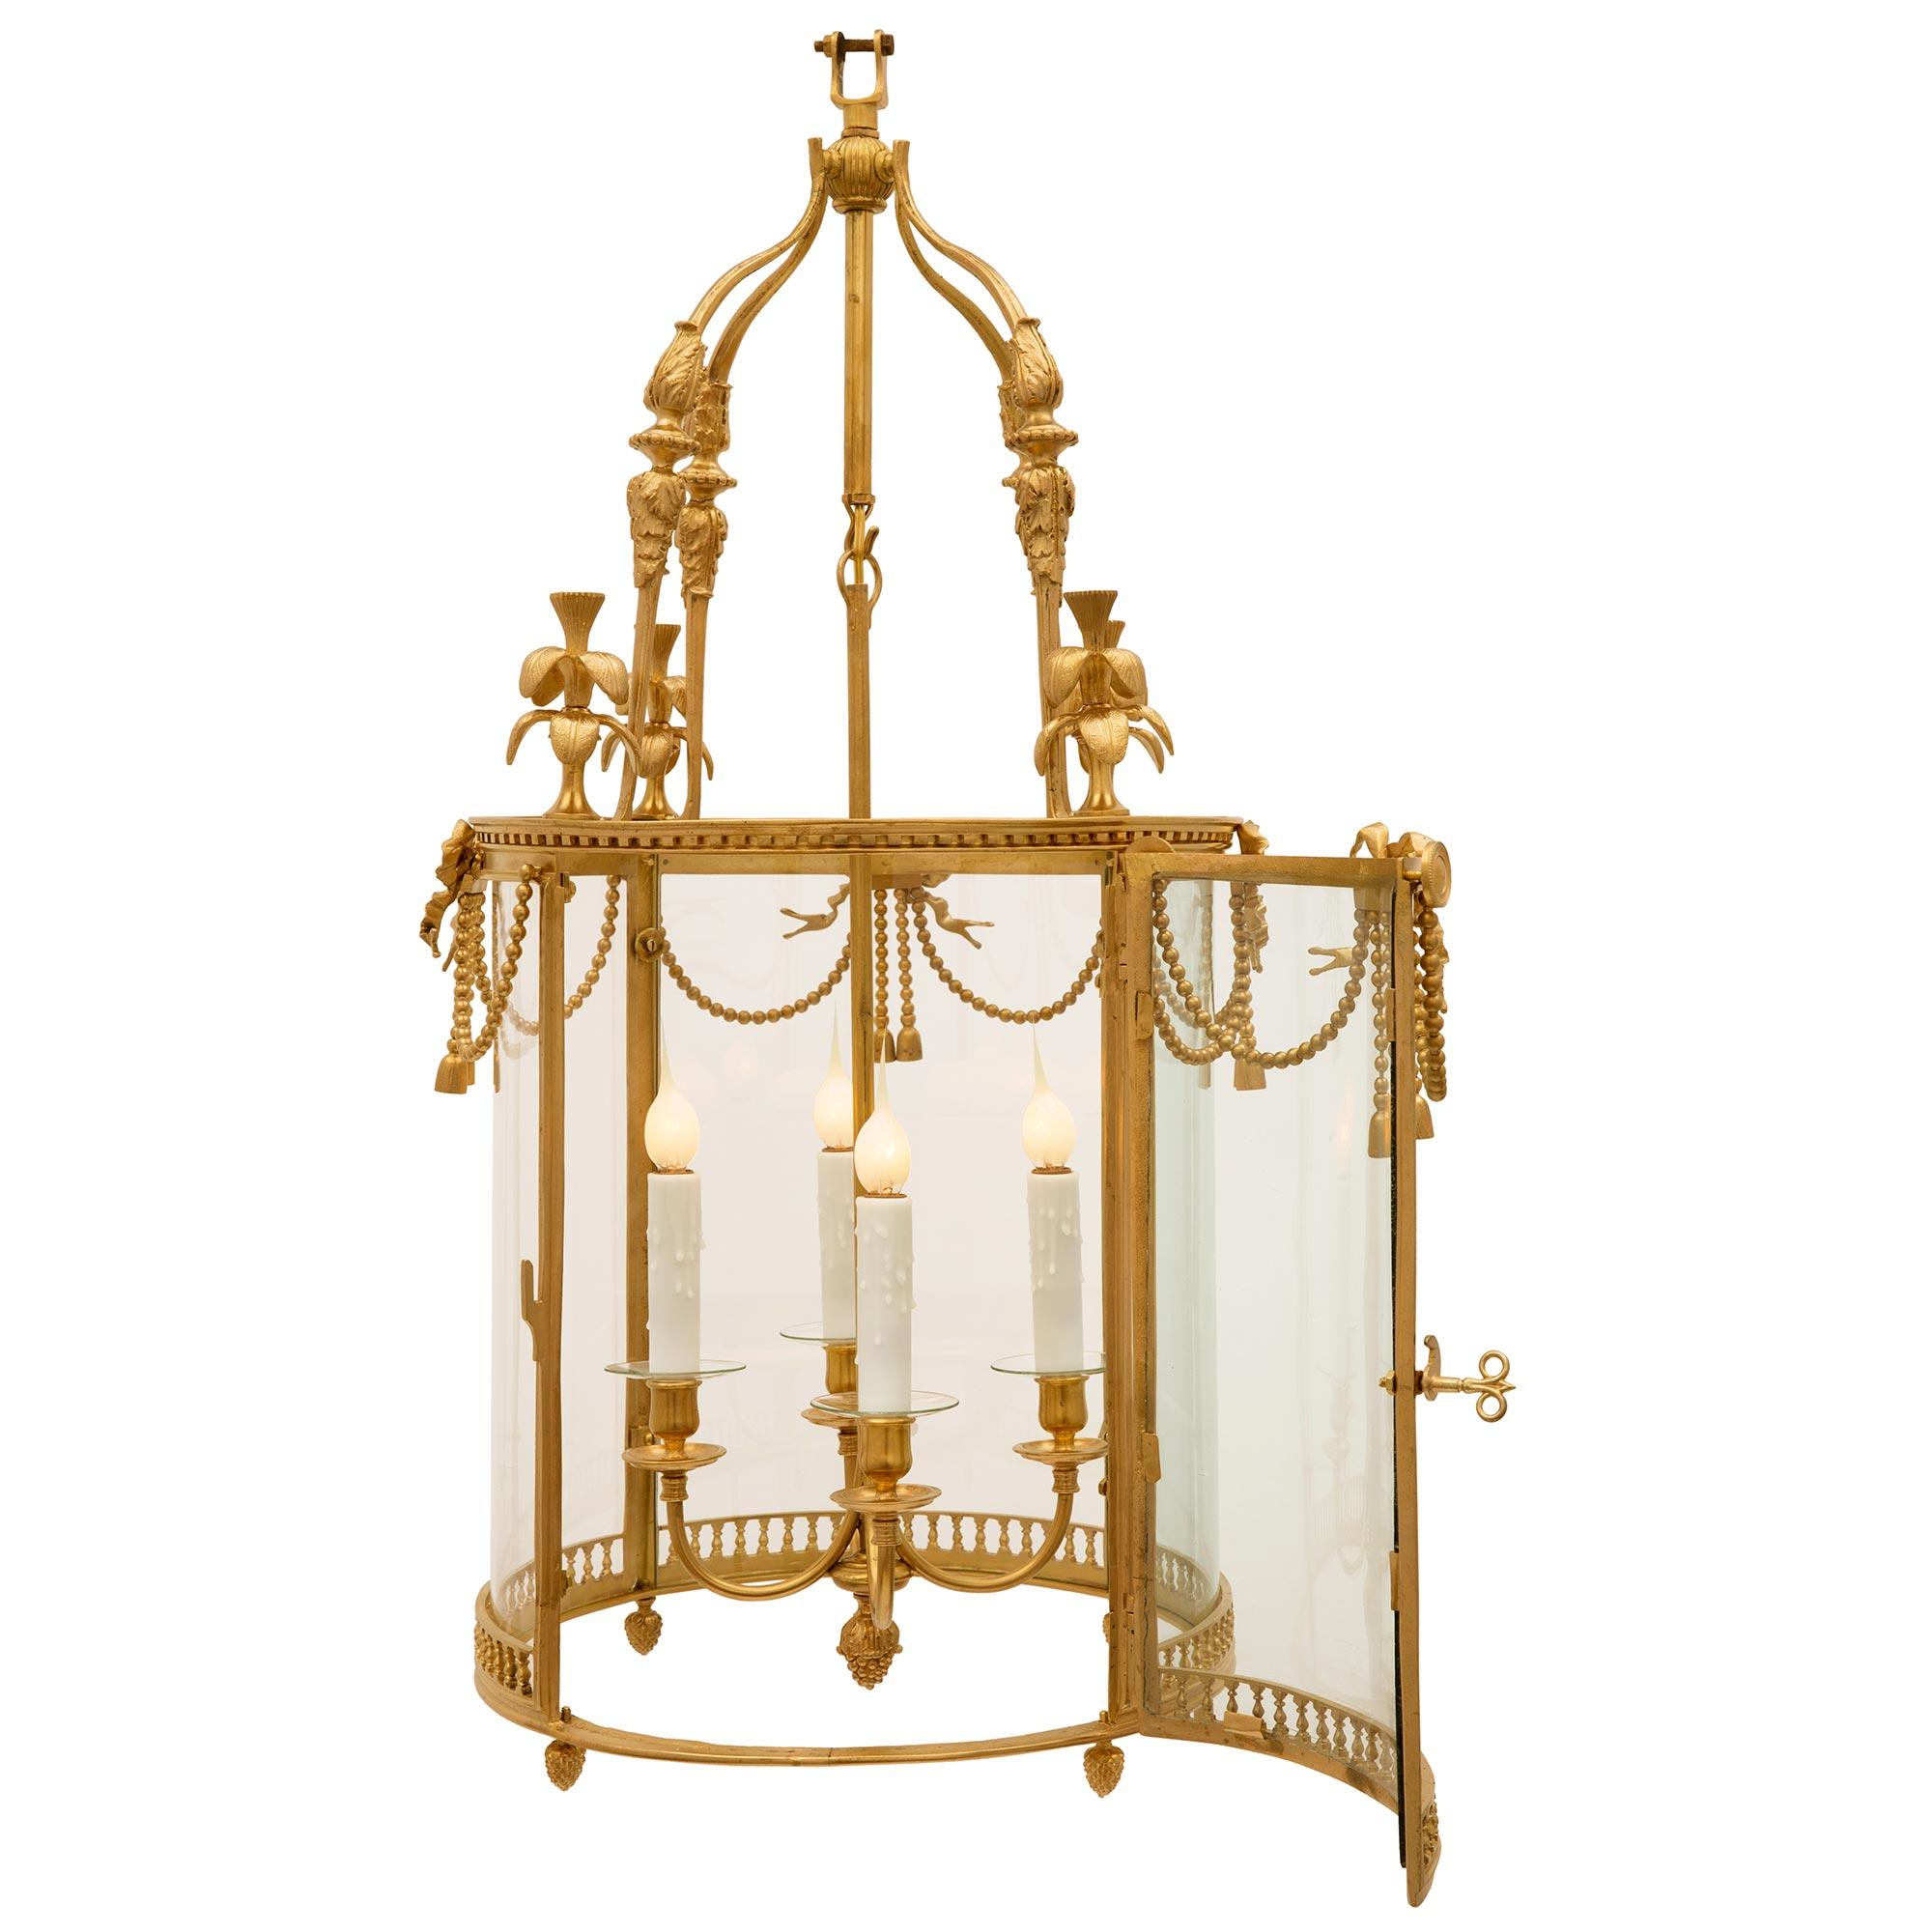 French 19th Century Louis XVI Style Ormolu and Glass Lantern In Good Condition For Sale In West Palm Beach, FL